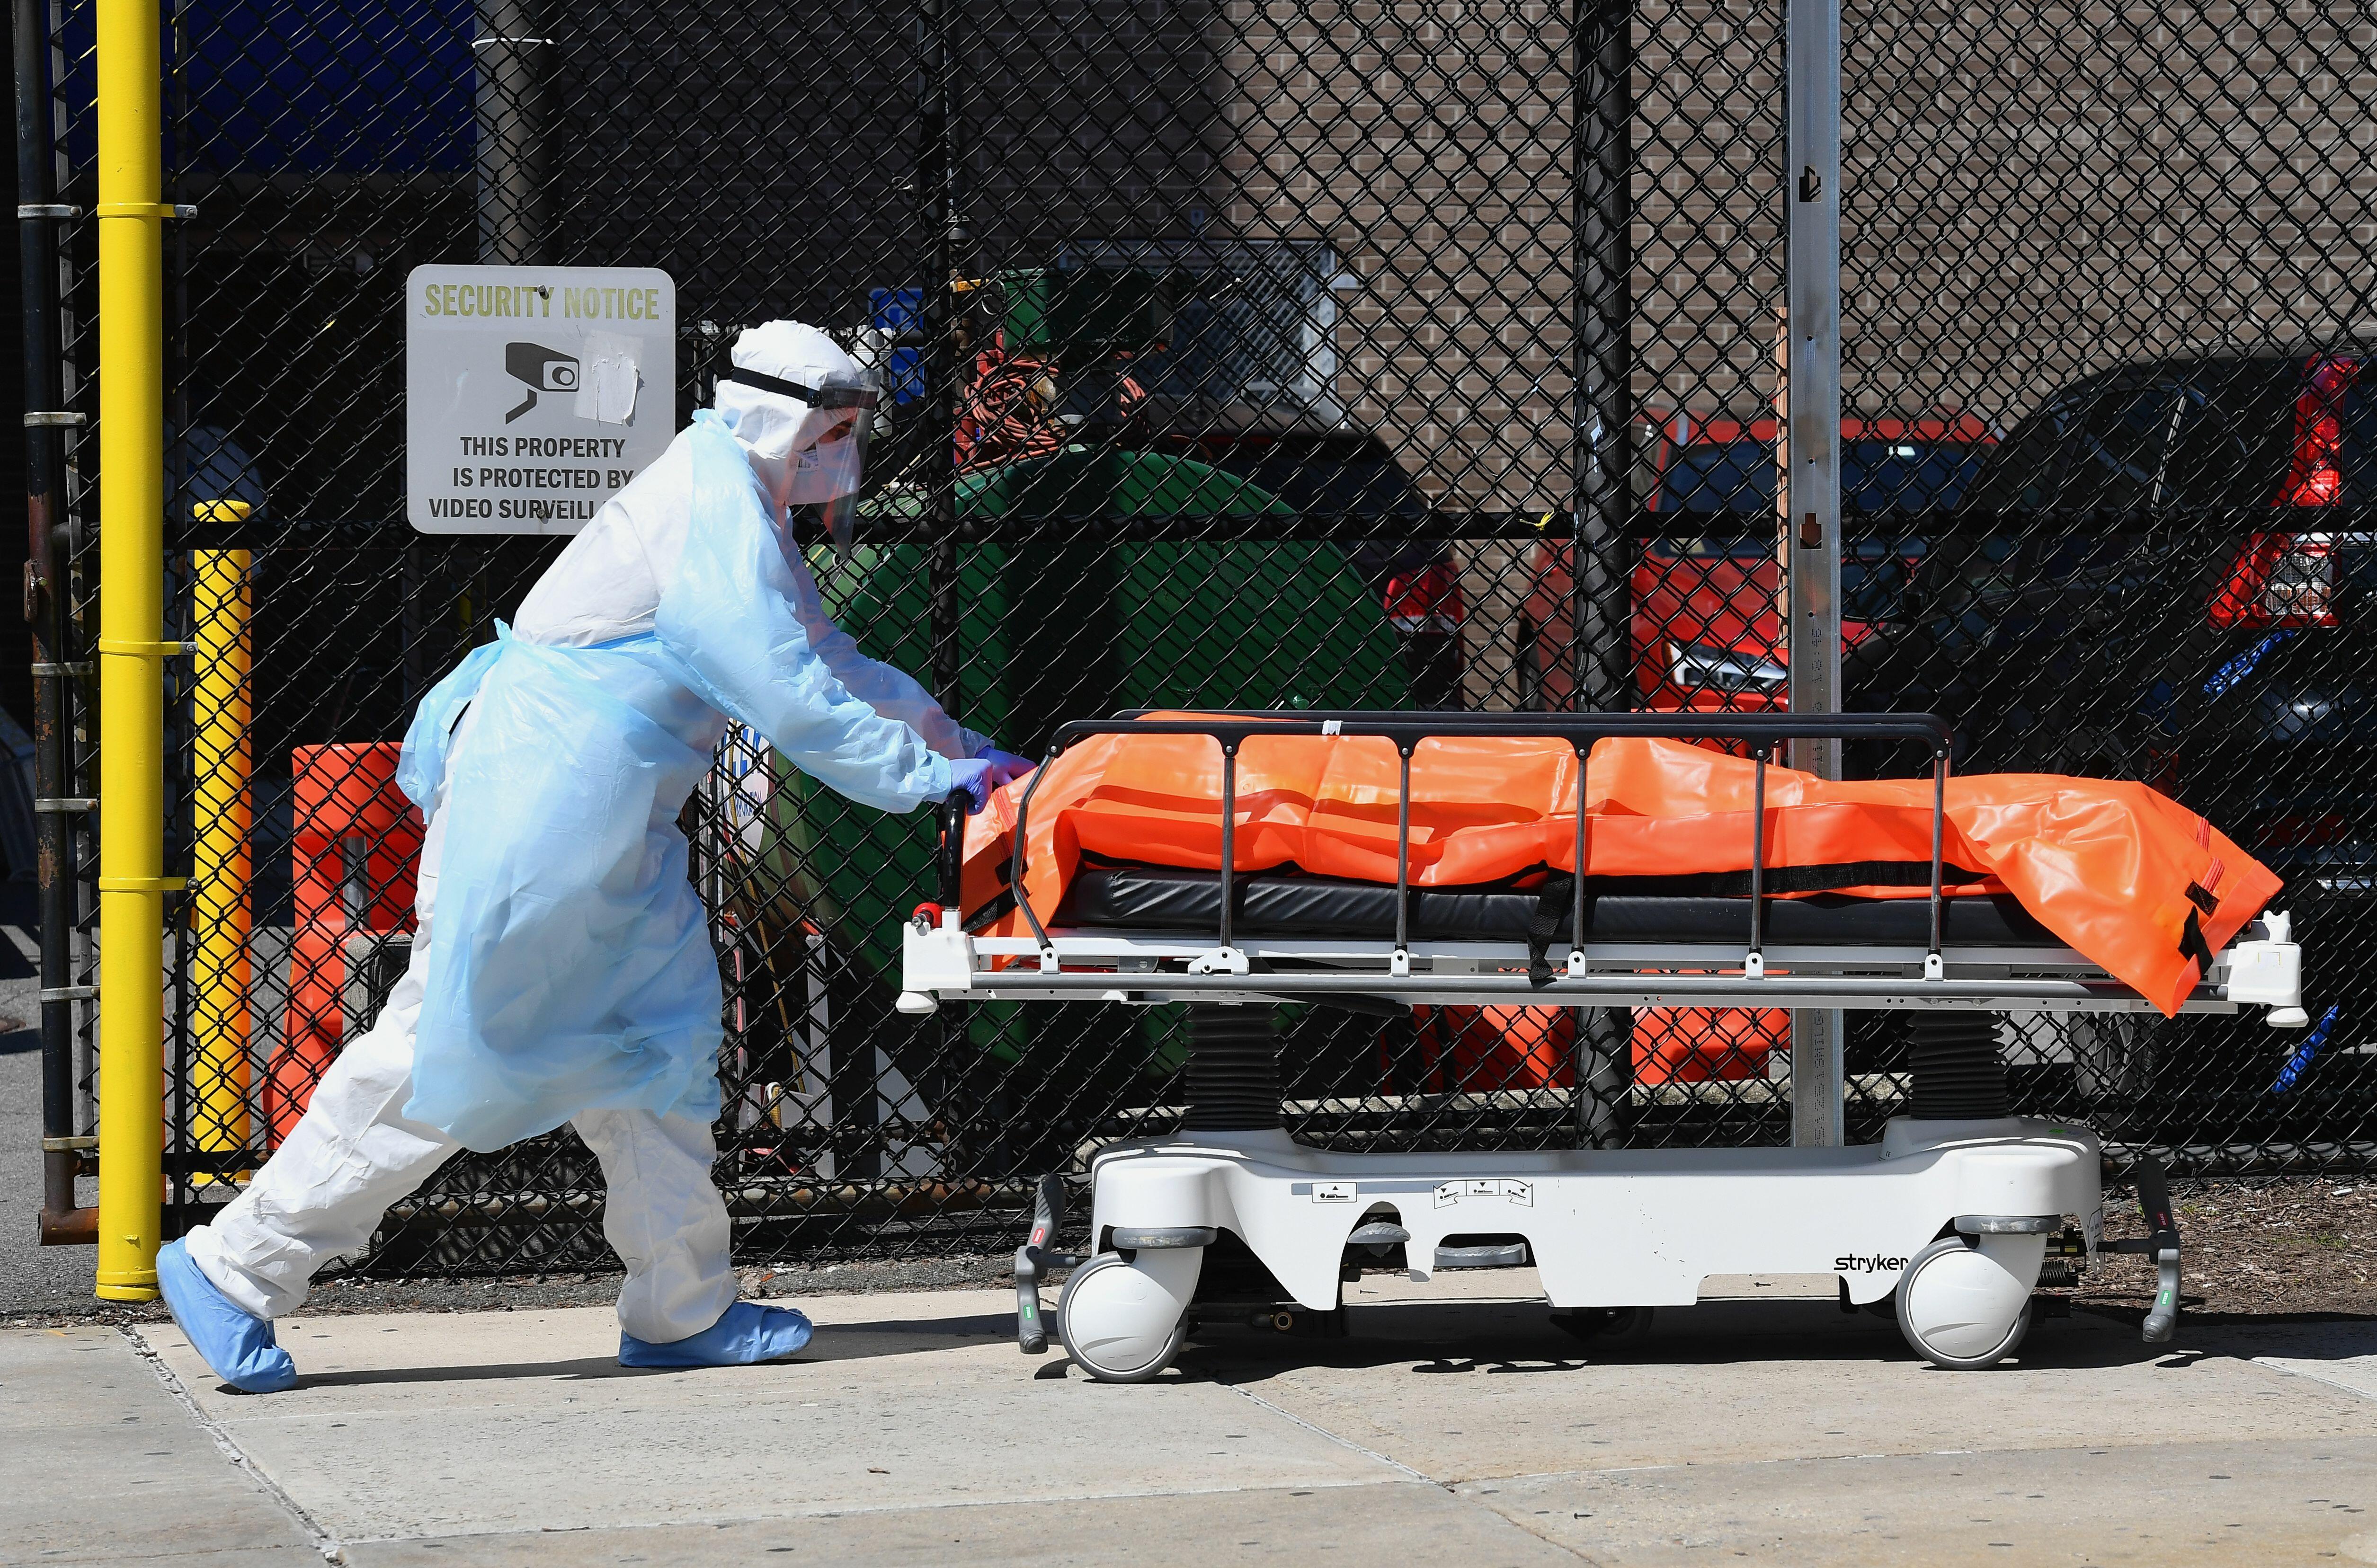 Woman Woke Up In a Body Bag After Mistakenly Being Declared Dead! - Thumbnail Image